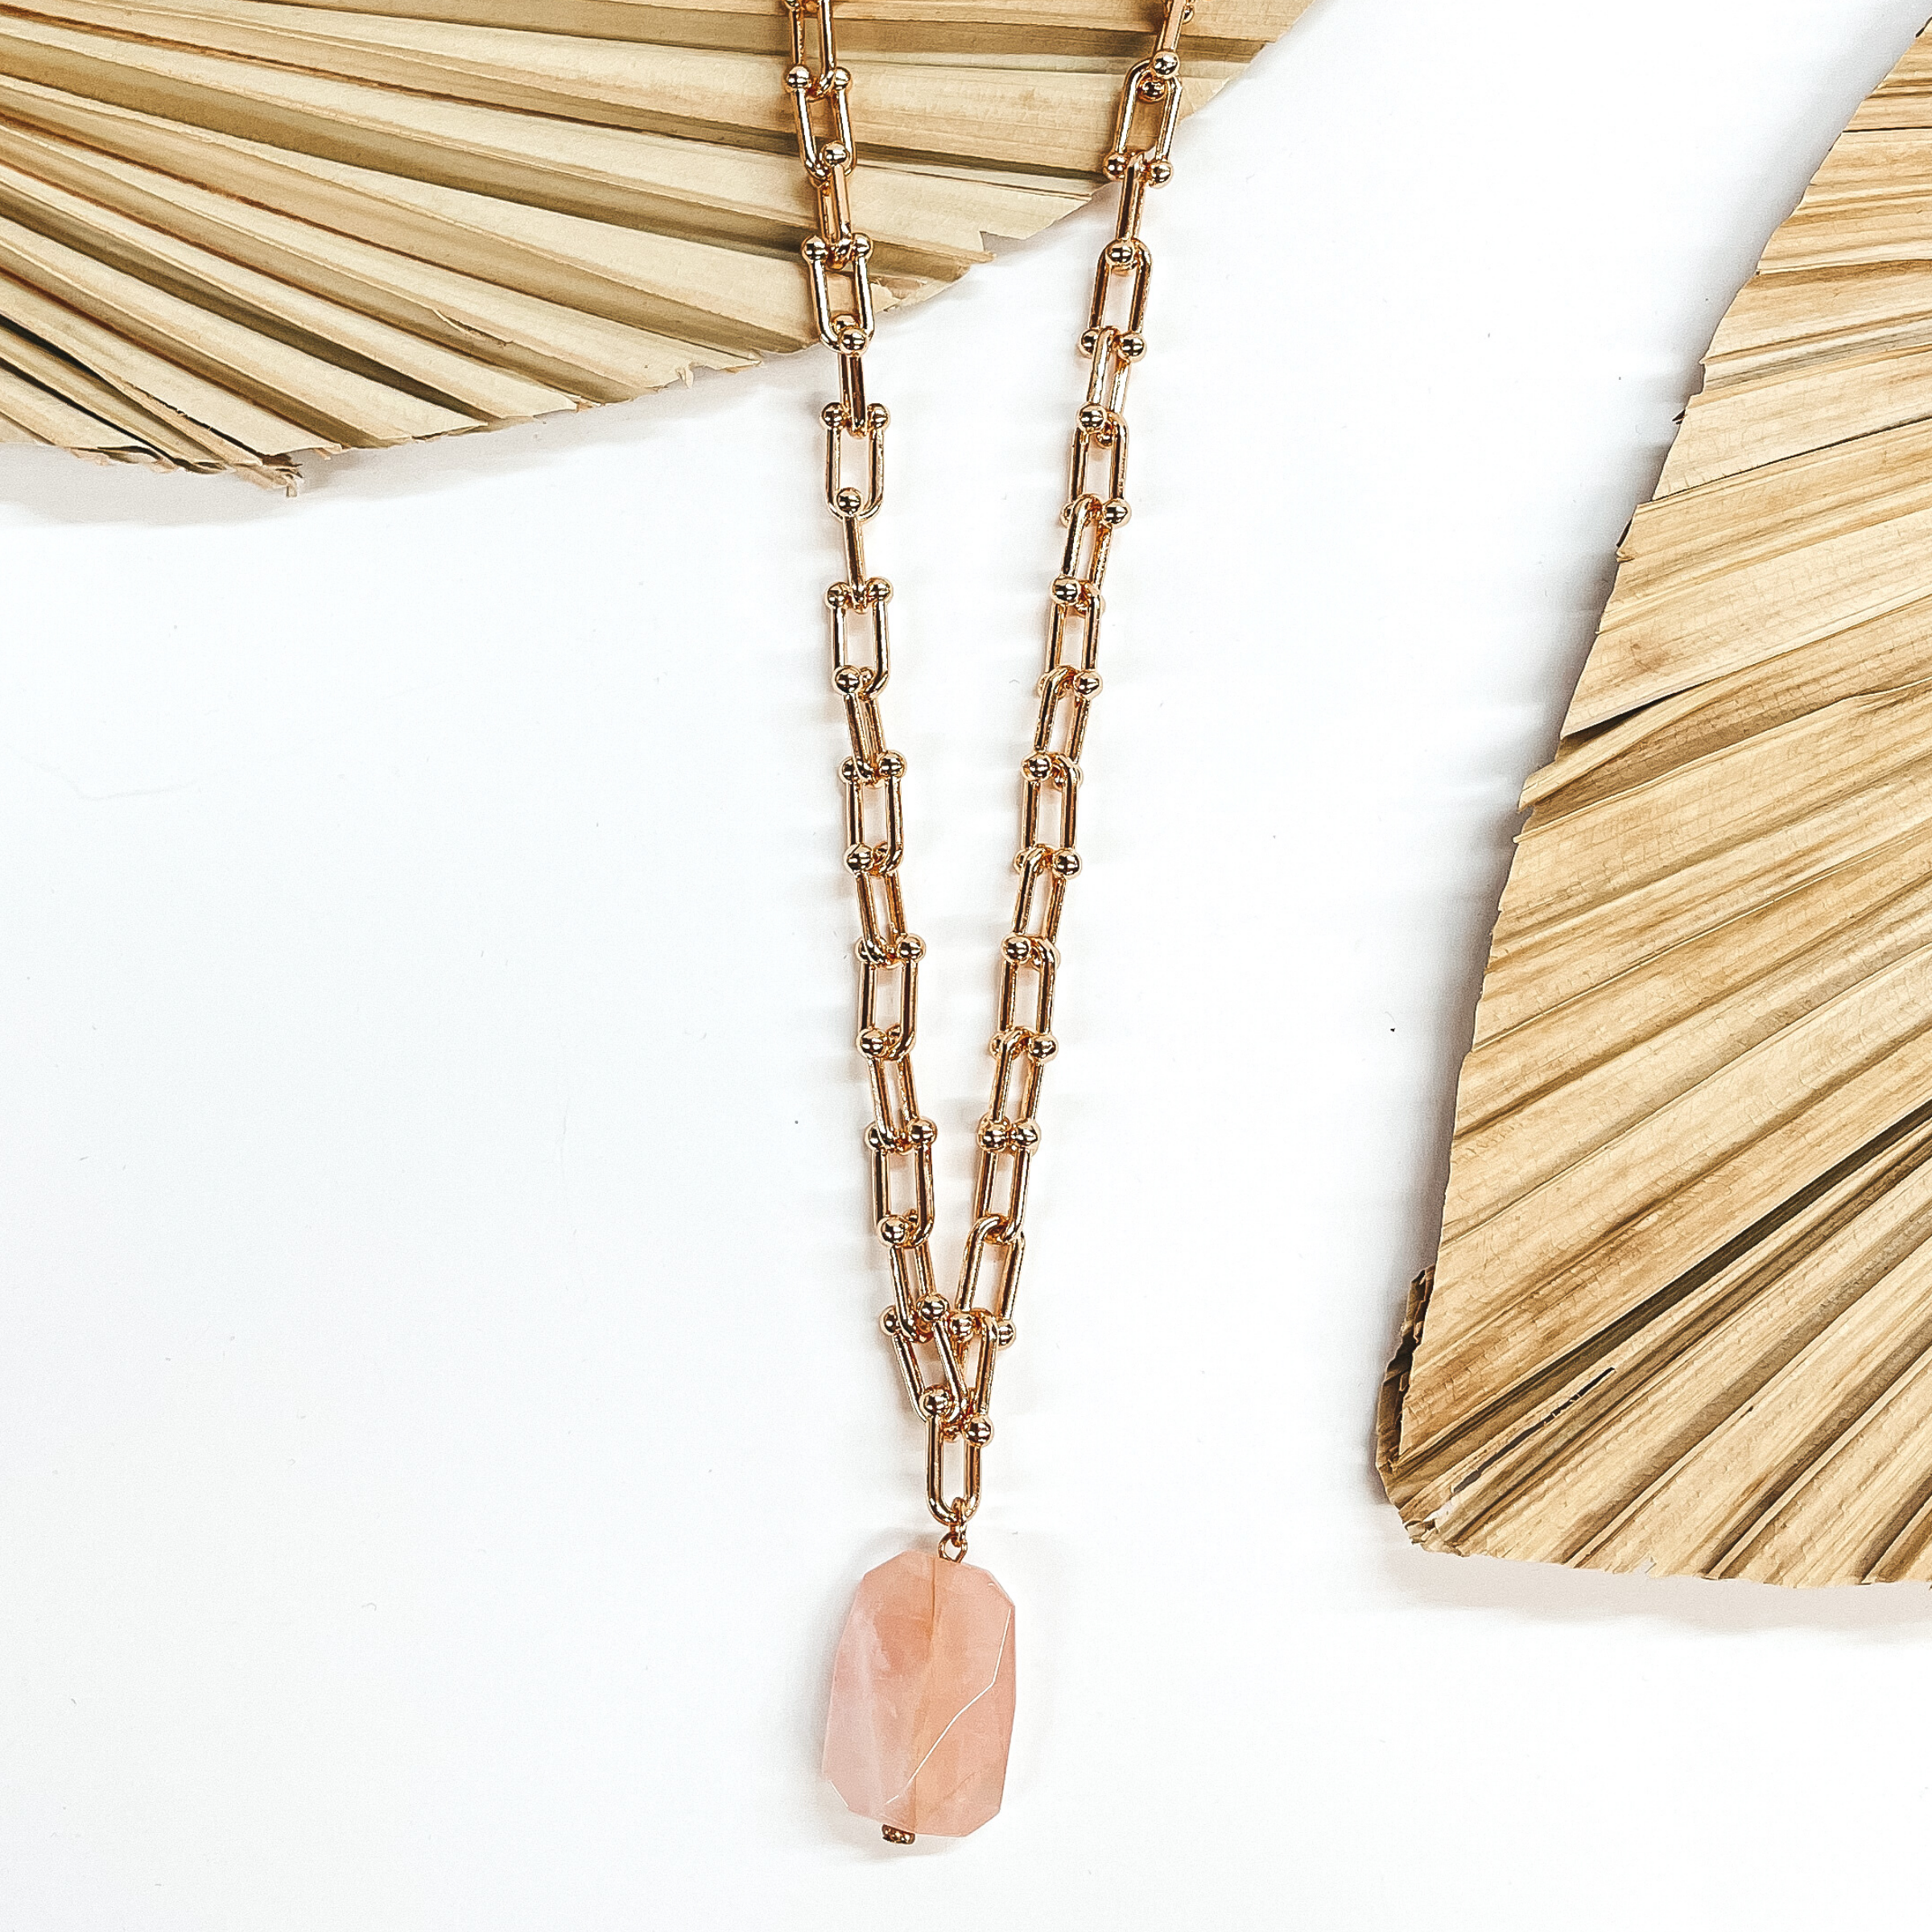 Gold thick link chain necklace with a big rose quartz pendant in the center. The necklace is taken laying on a dried up palm leaf and white background, with  another dried up palm leaf in the side as decor.